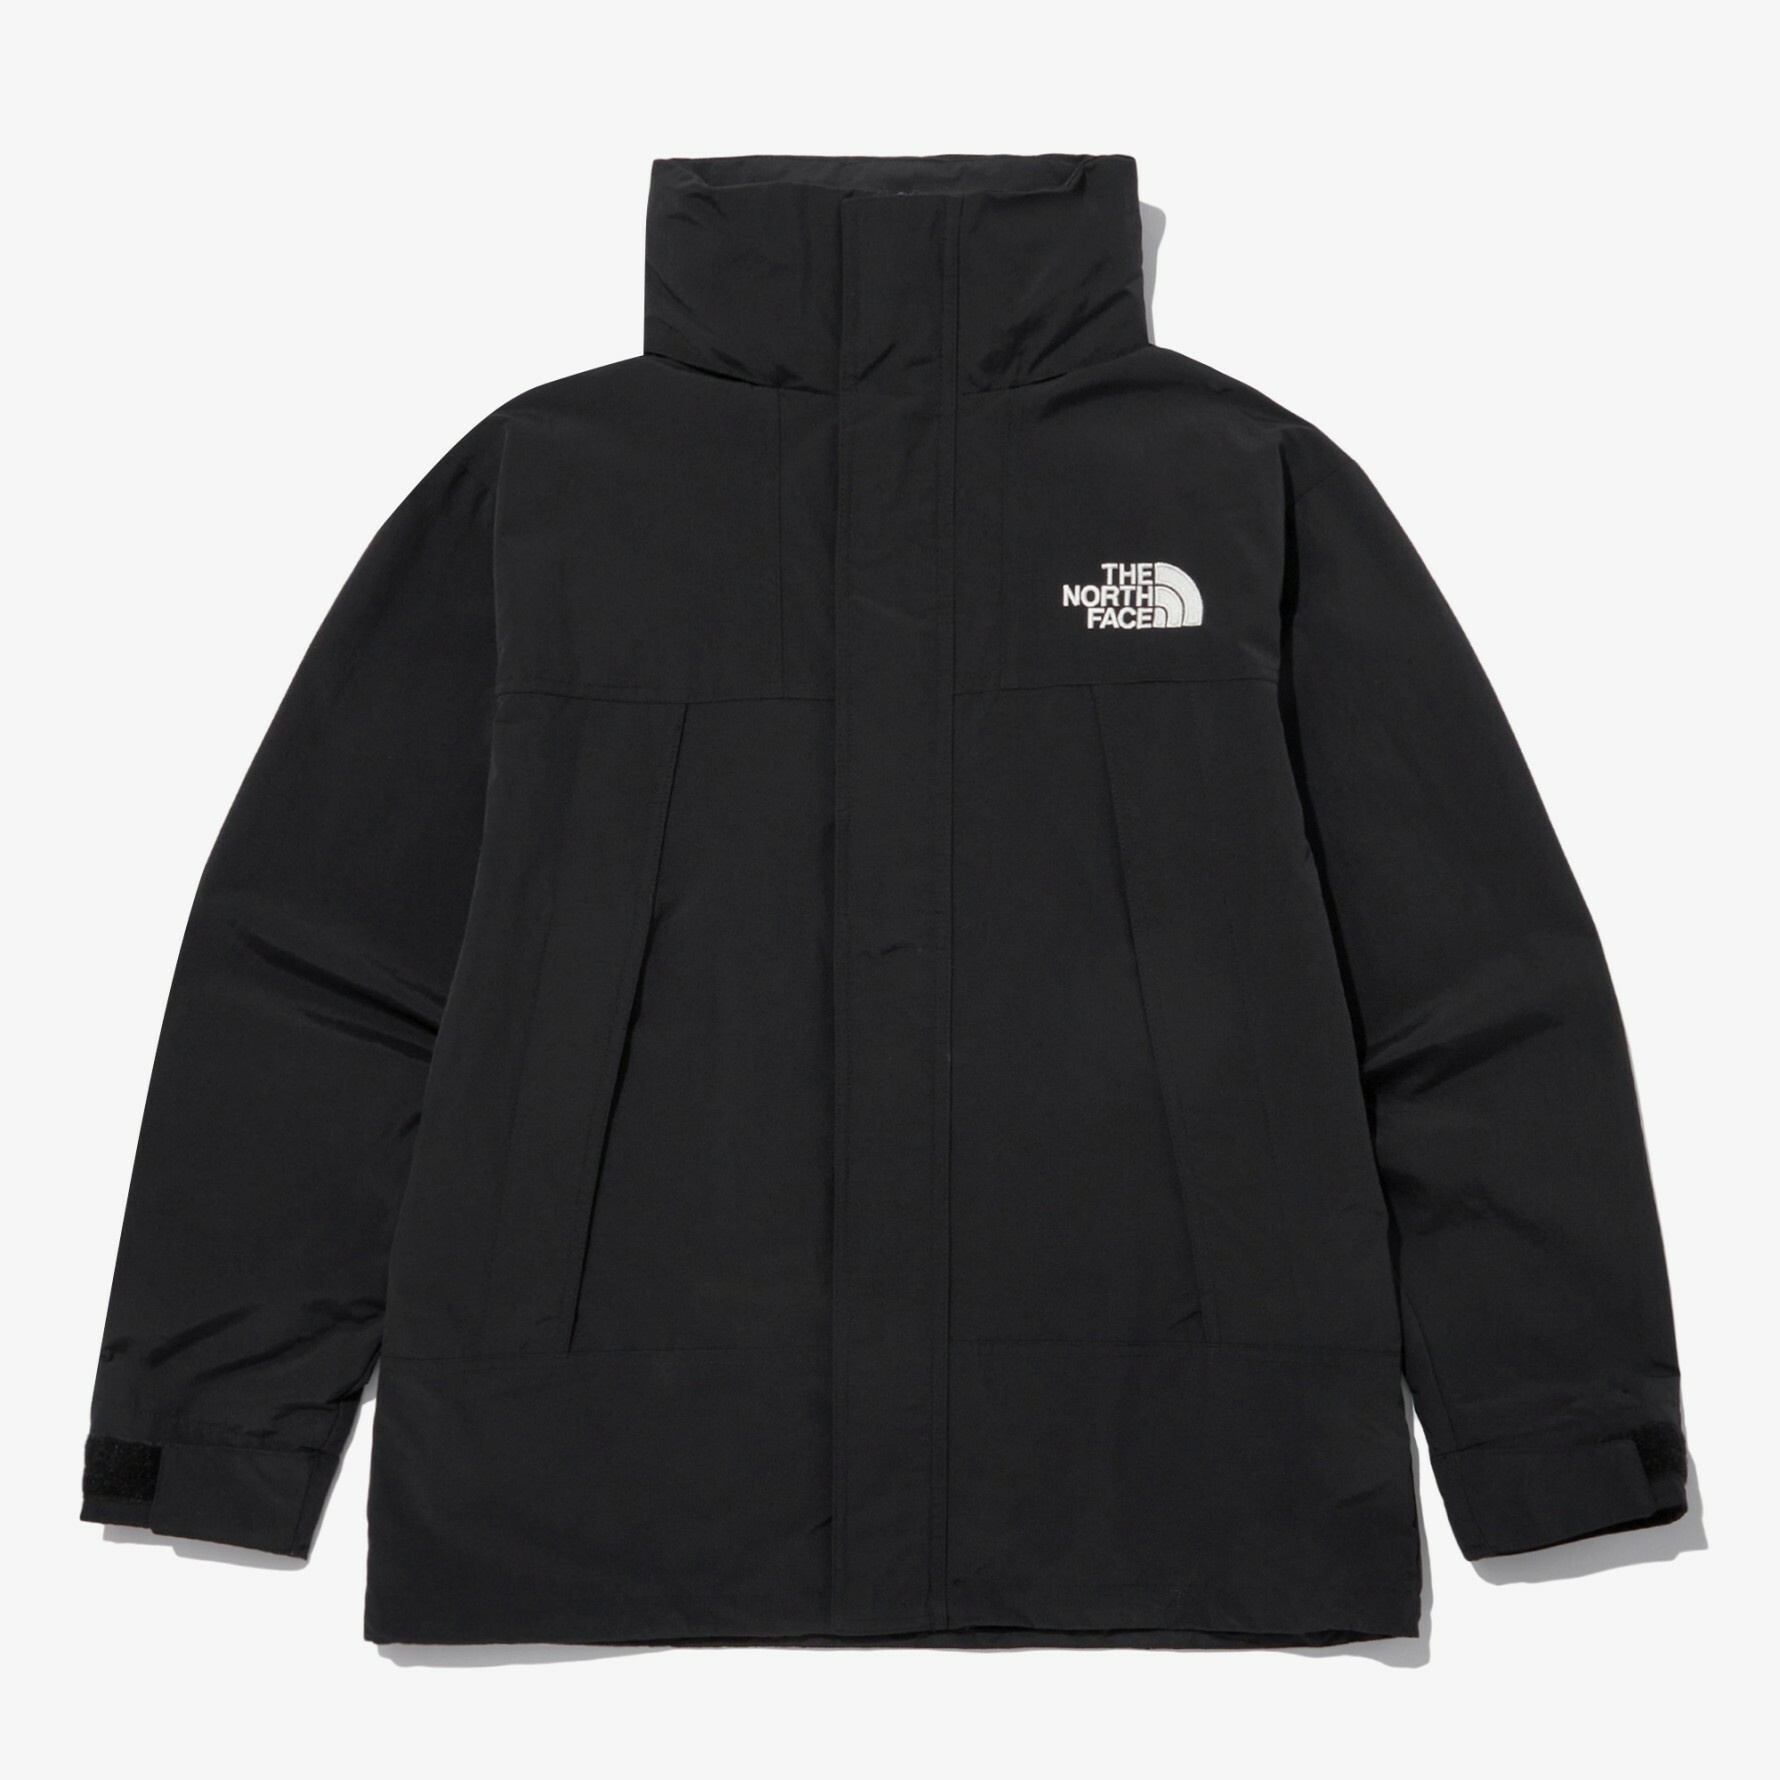 THE NORTH FACE GO MOUNTAIN JACKET 長袖外套夾克黑NJ3BN50A